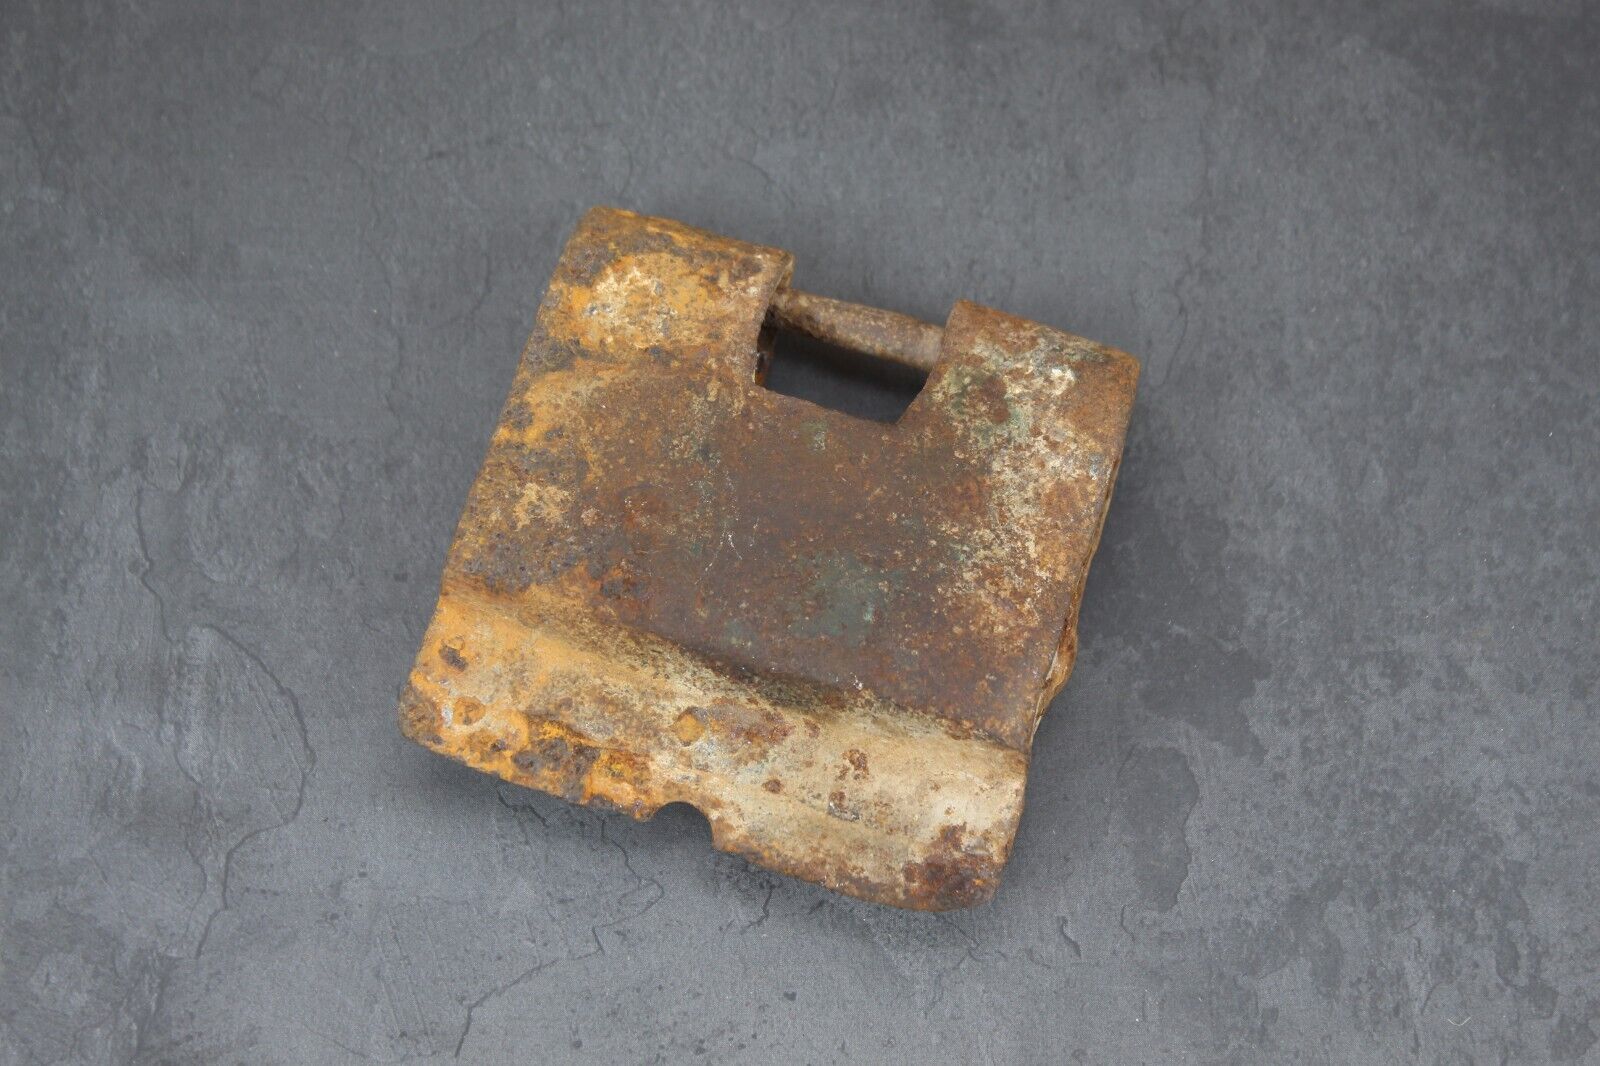 Old Rusted Jammed Iron Padlock - Non-Working, Vintage, and Collectible Lock